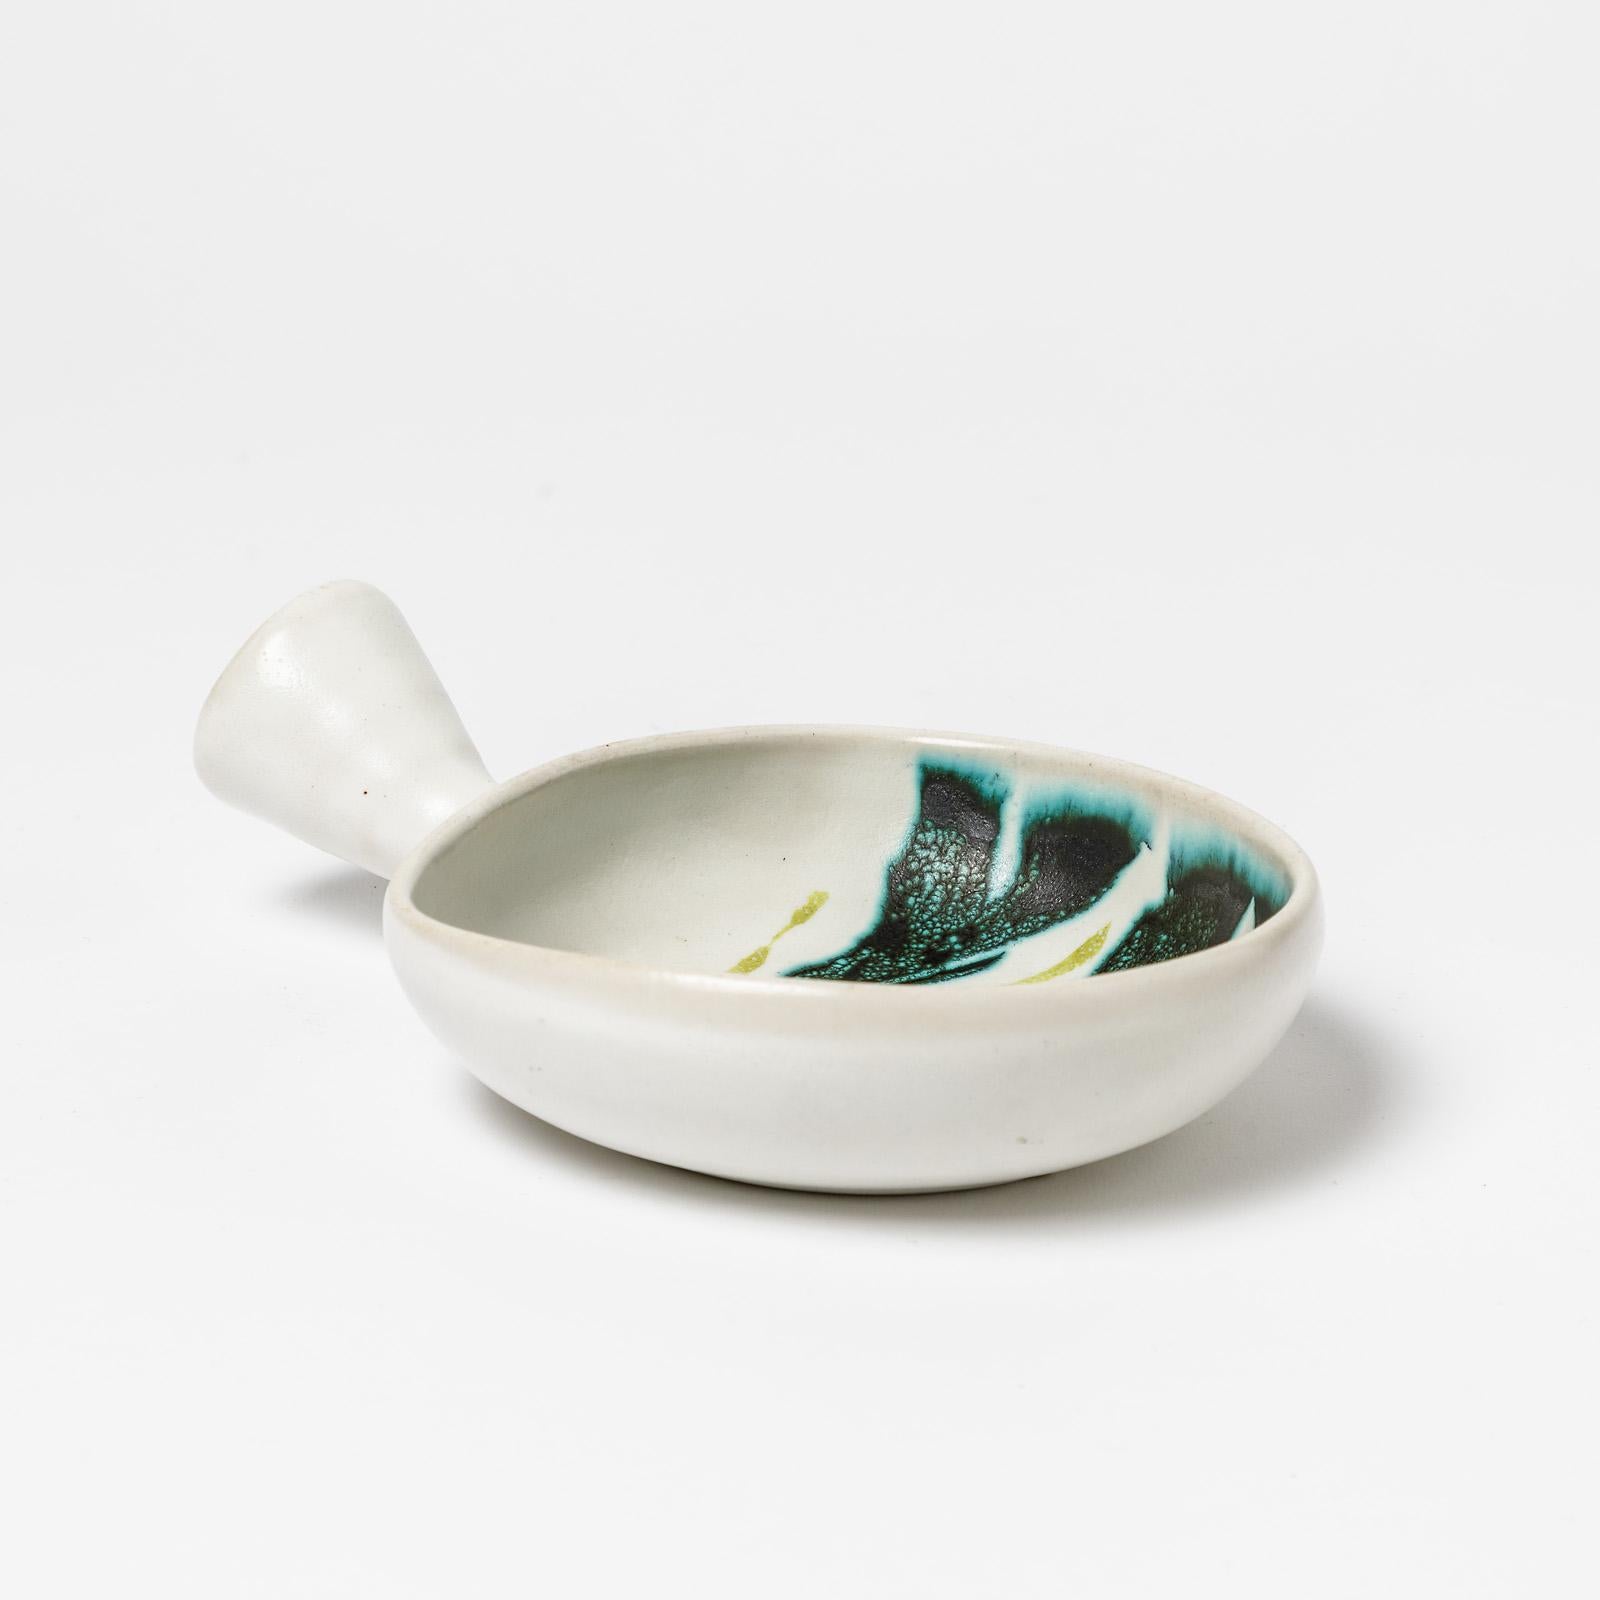 Small Ceramic Dish by Robert Deblander, circa 1965-1970 In Excellent Condition For Sale In Saint-Ouen, FR